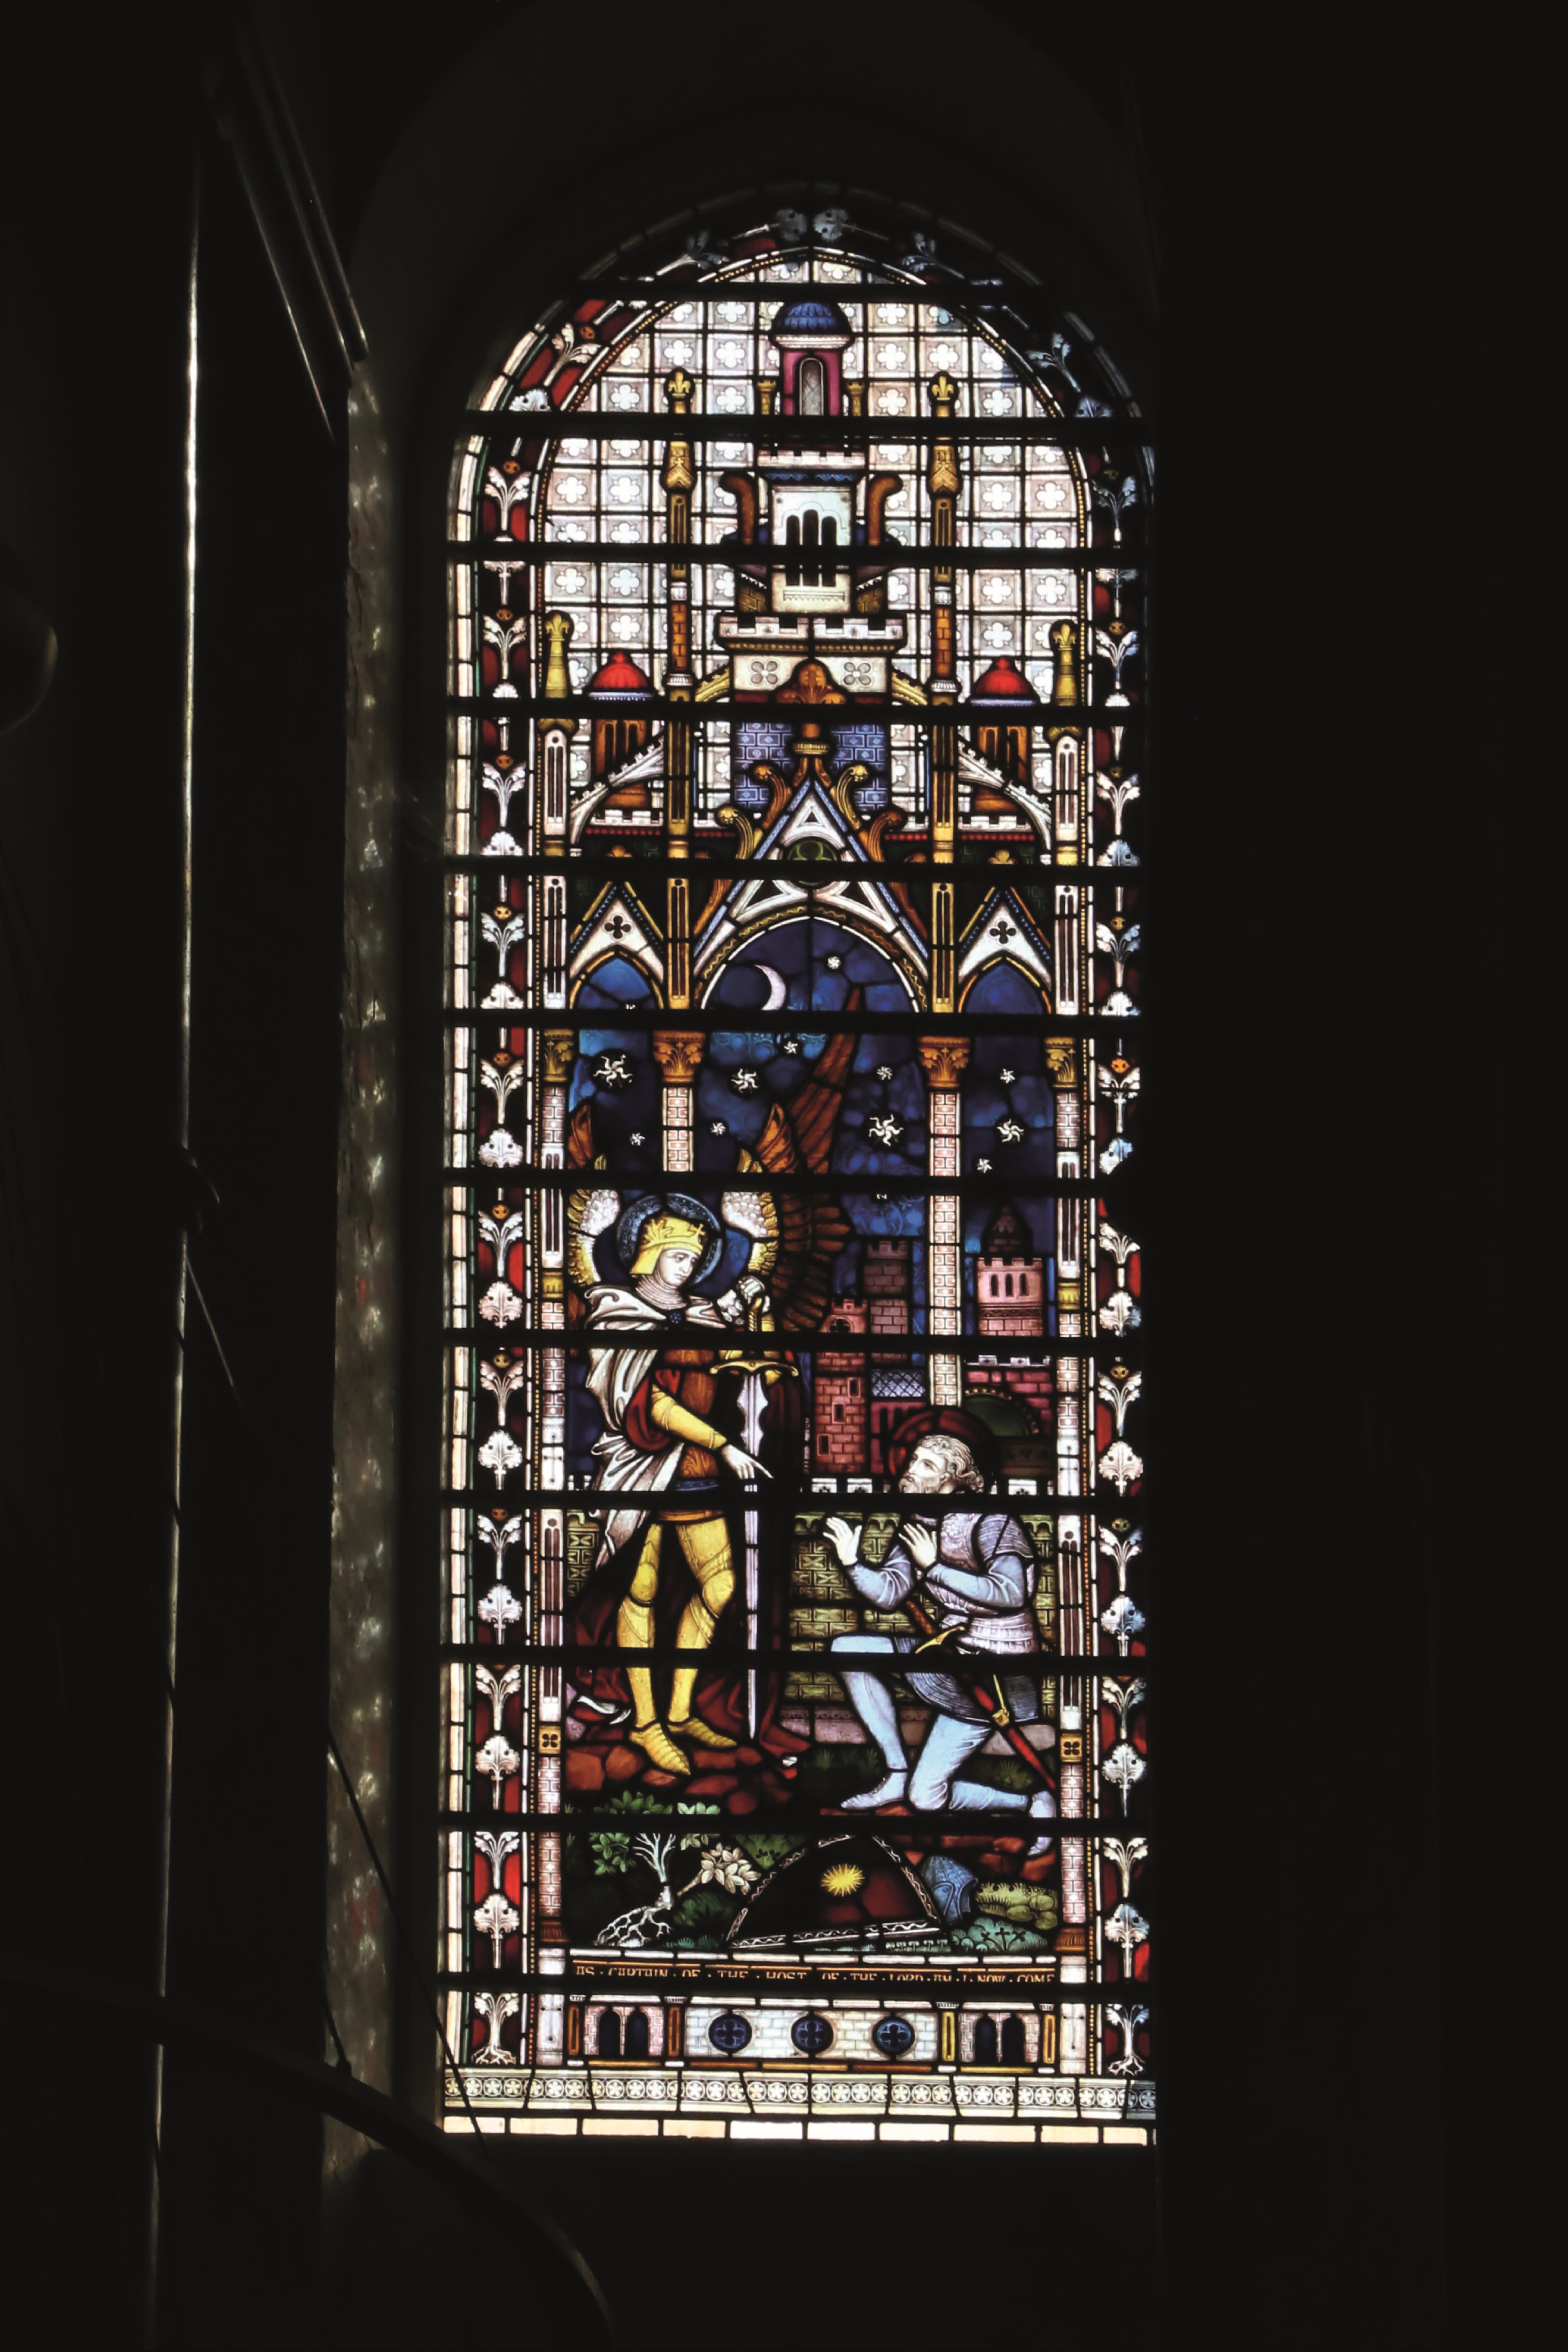 Photograph of the stained glass window dedicated to Captain William John Gill in the south quire transept.